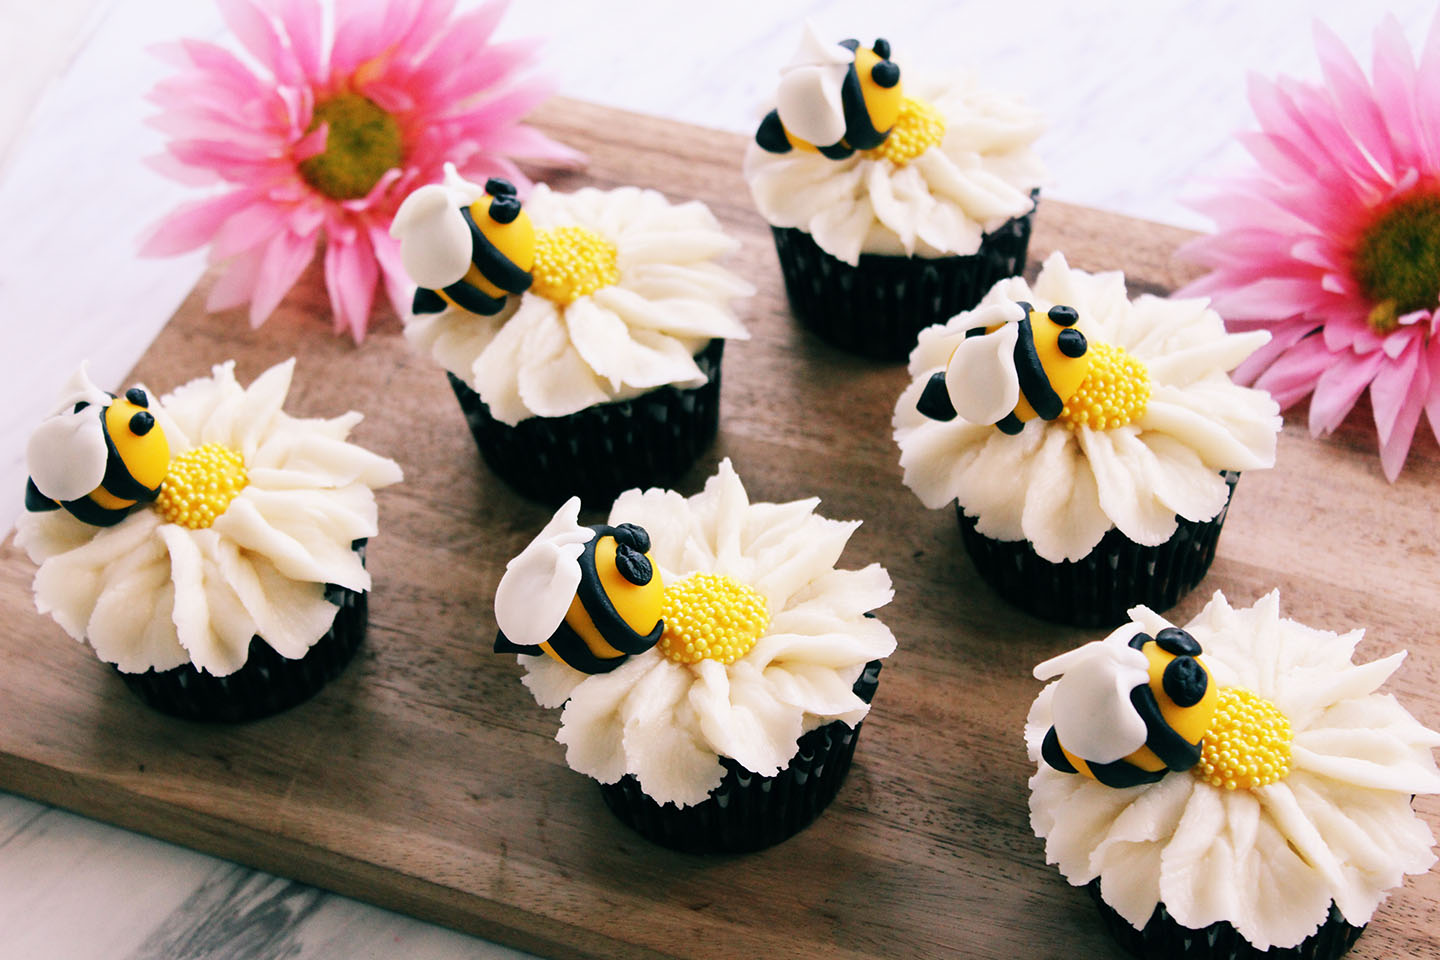 3 Pcs Bumble Bee Cake Decoration Bumble Bee Fondant Mold Bee Mold Daisy  Flower Mold Bumble Bee Cupcake Cake Decorations